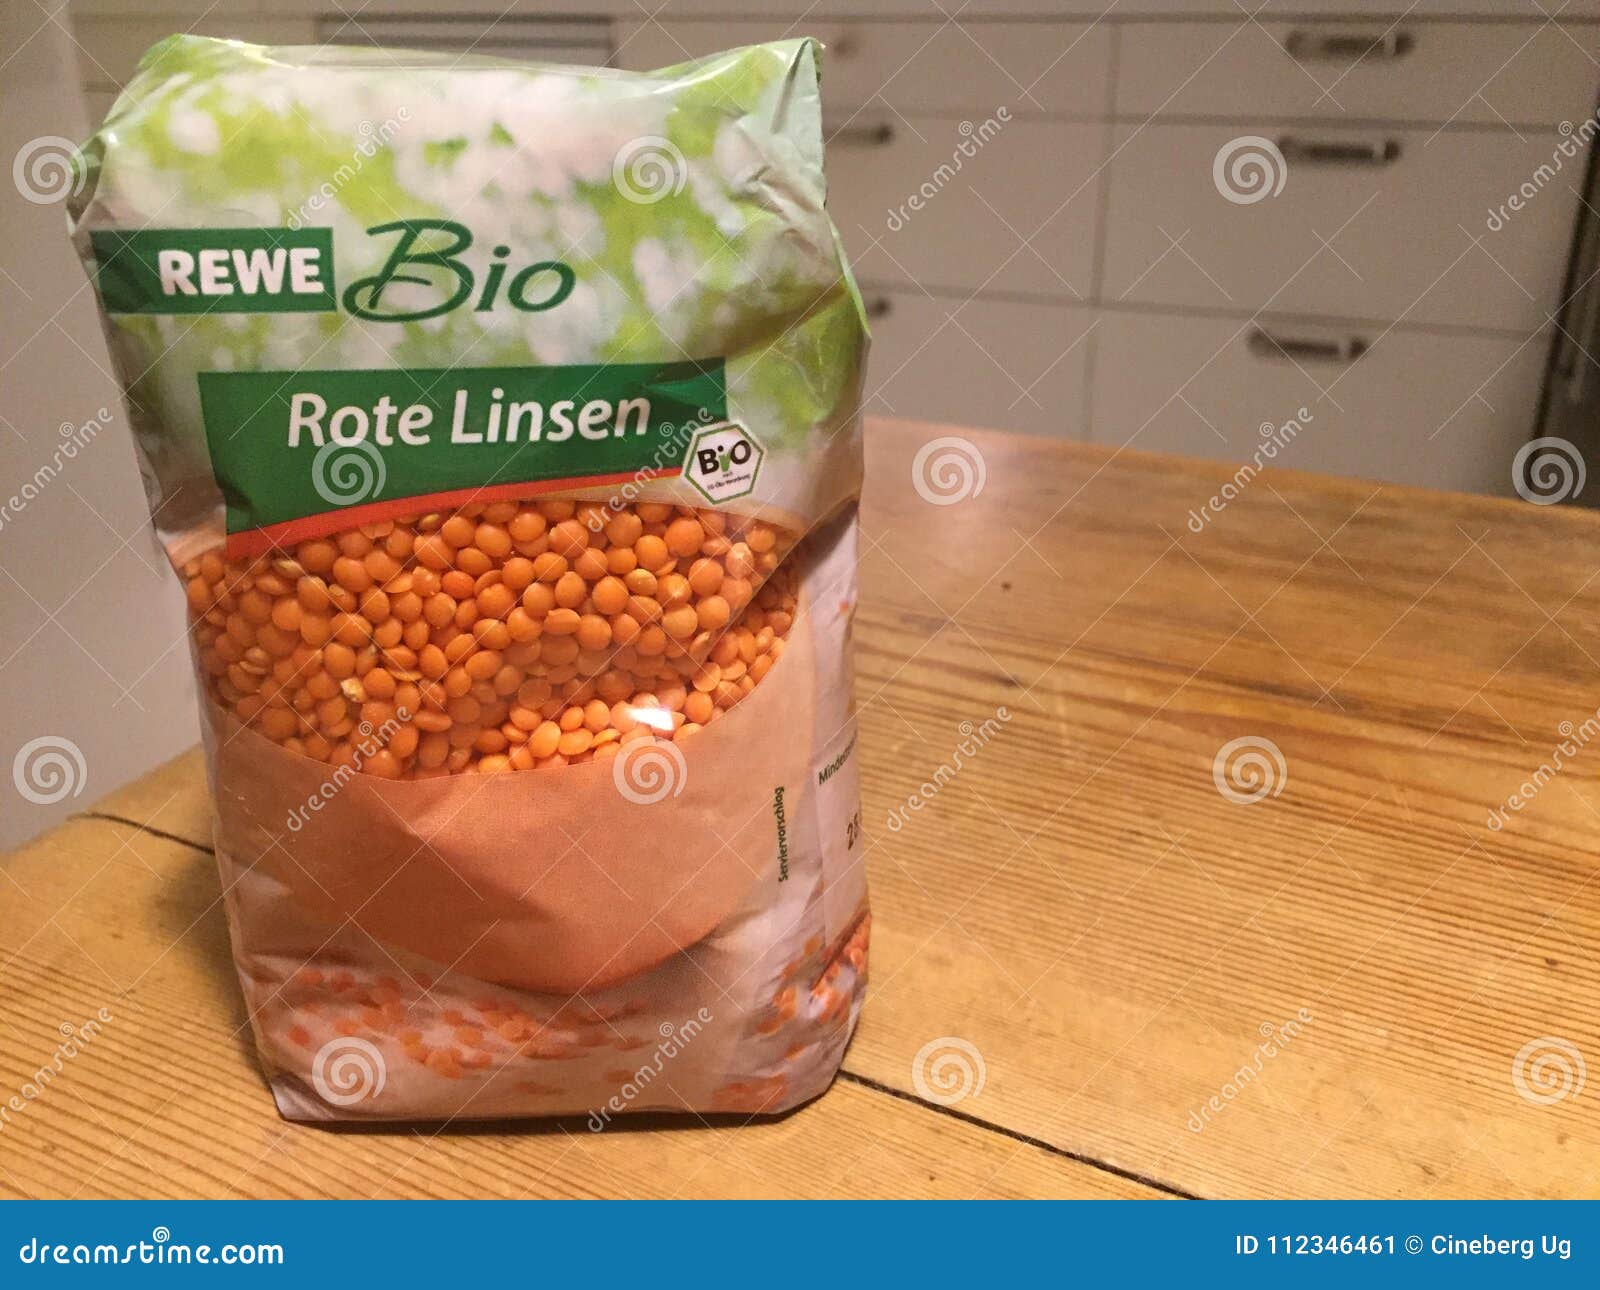 https://thumbs.dreamstime.com/z/berlin-germany-january-rewe-bio-rote-linsen-german-red-lentils-group-diversified-retail-tourism-co-operative-112346461.jpg